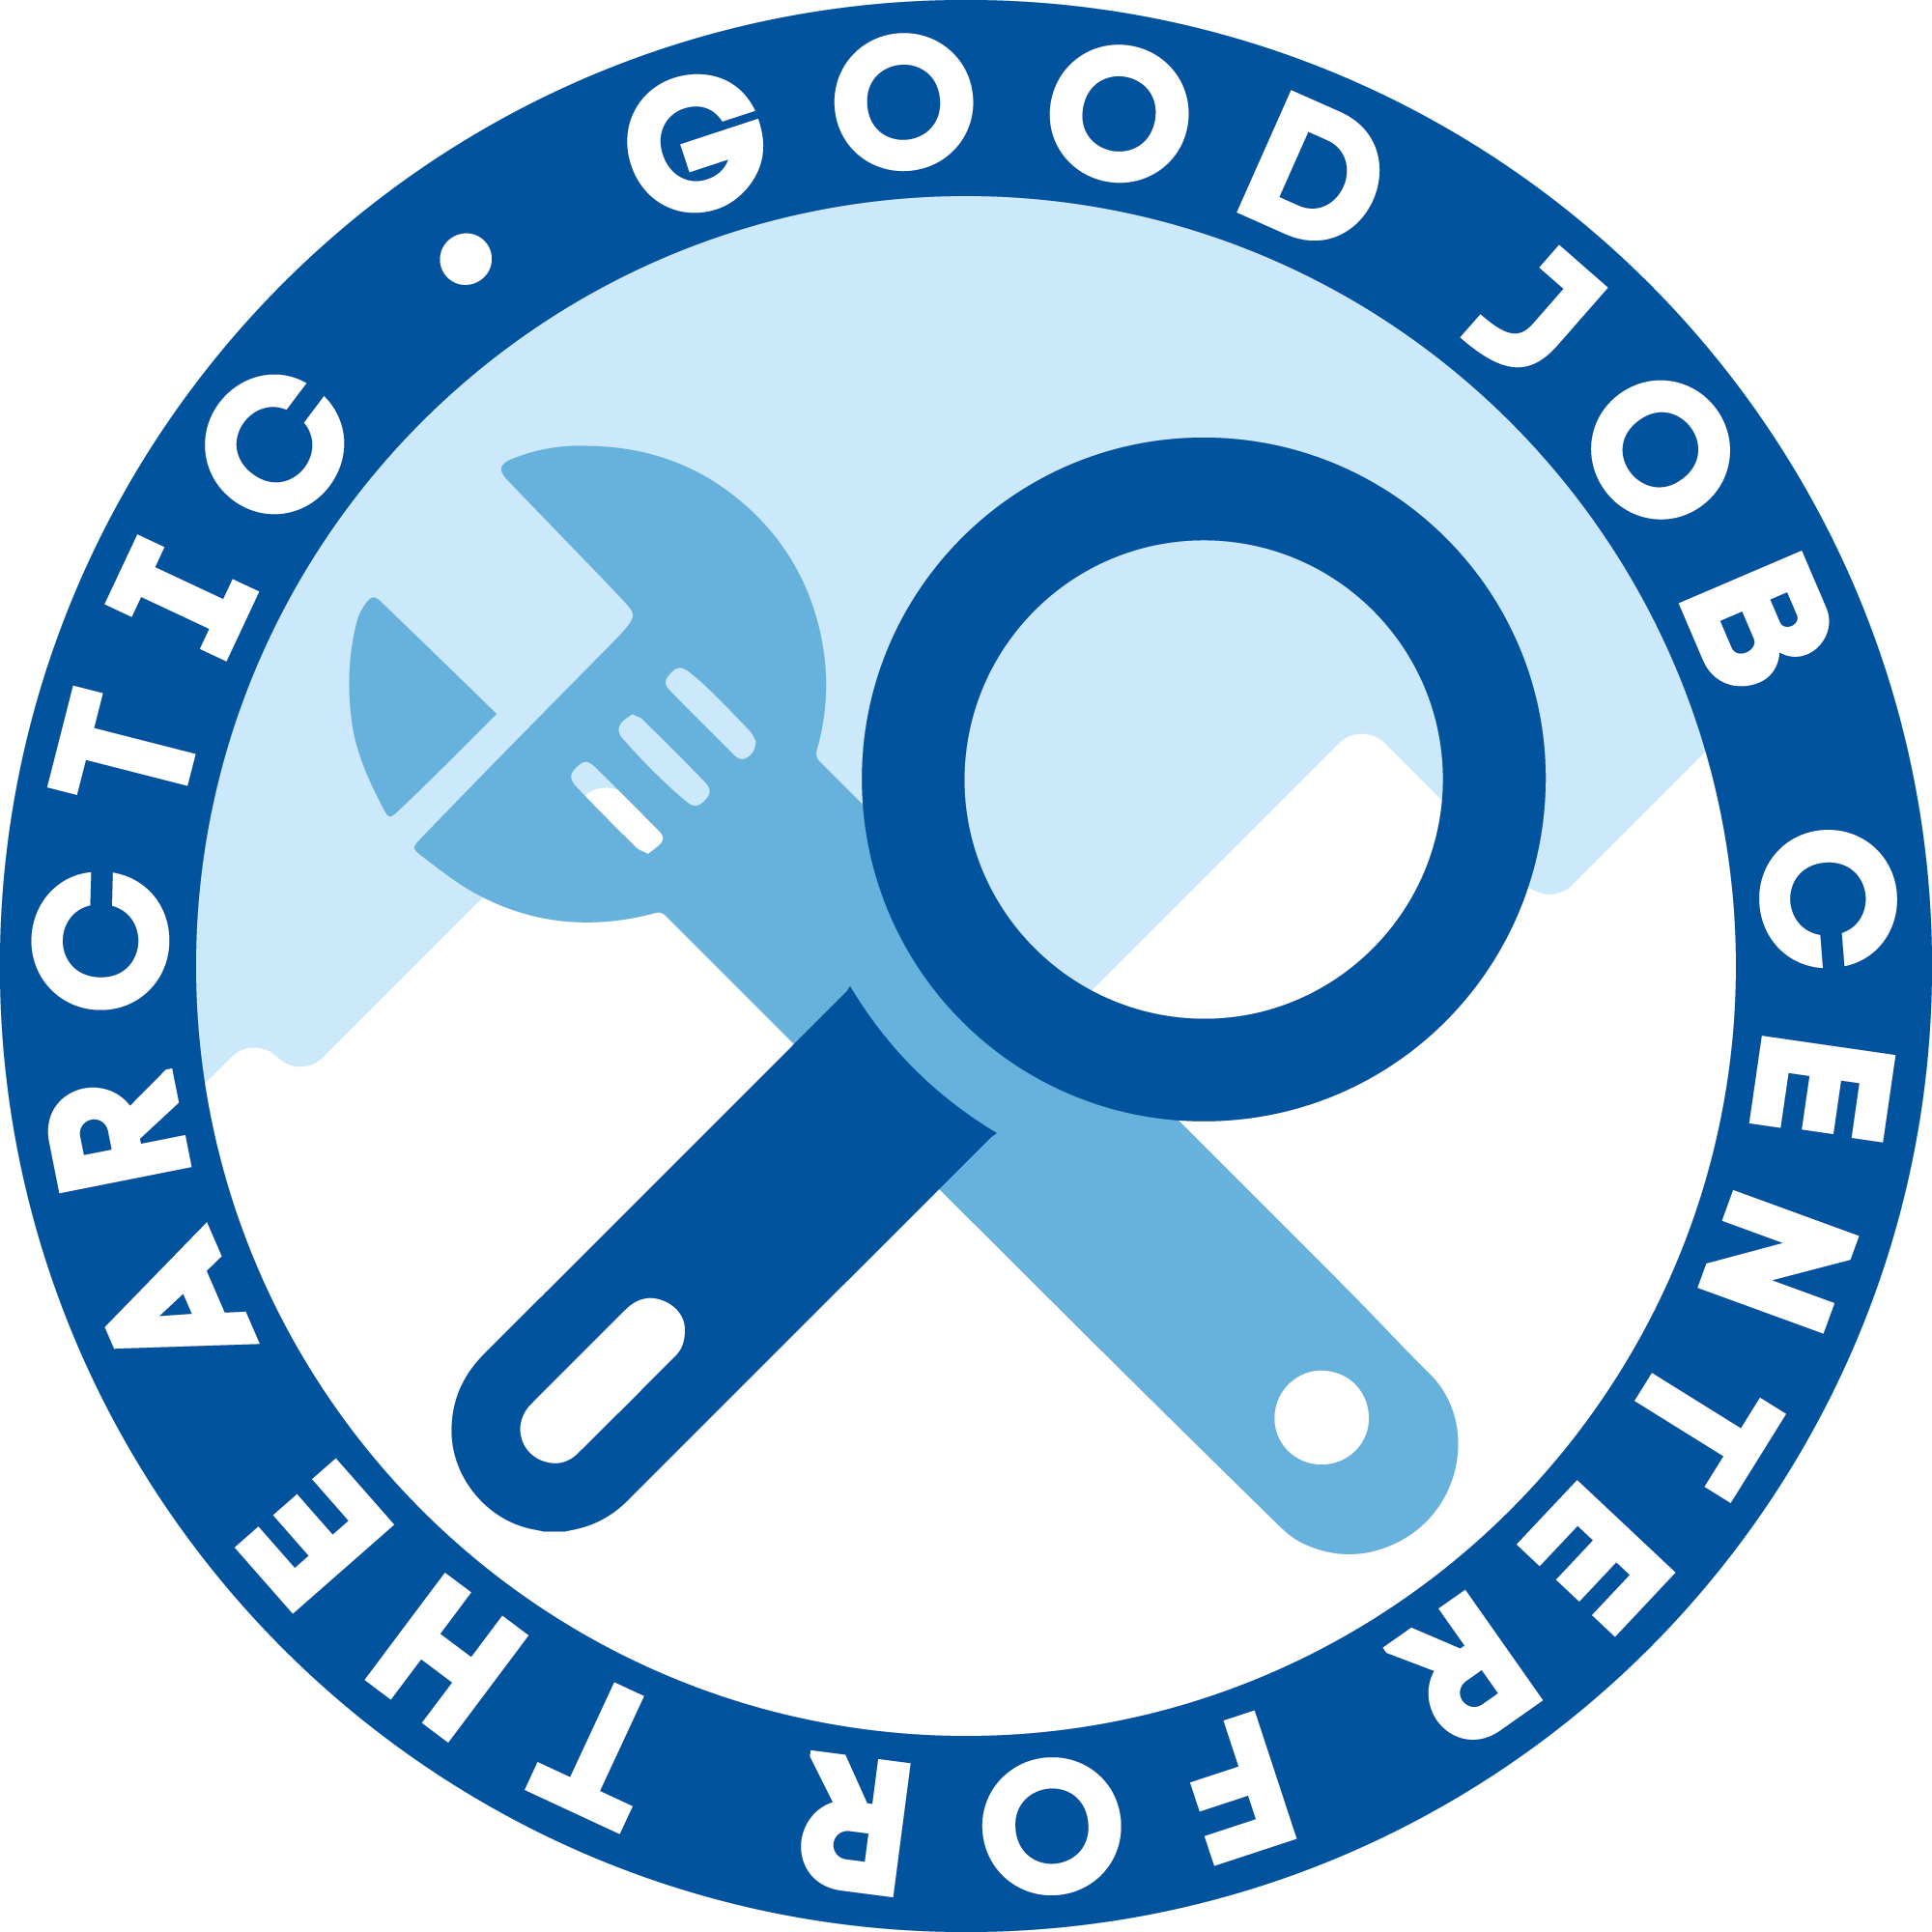 The Good Job Center was launched in cooperation with the Russian State 
Social University. The project's Telegram channel posts recent news of the Arctic job market, along with up-to-date job offers in the High North, and keeps track of the corporate and commercial legislation relevant to doing business in the Arctic.